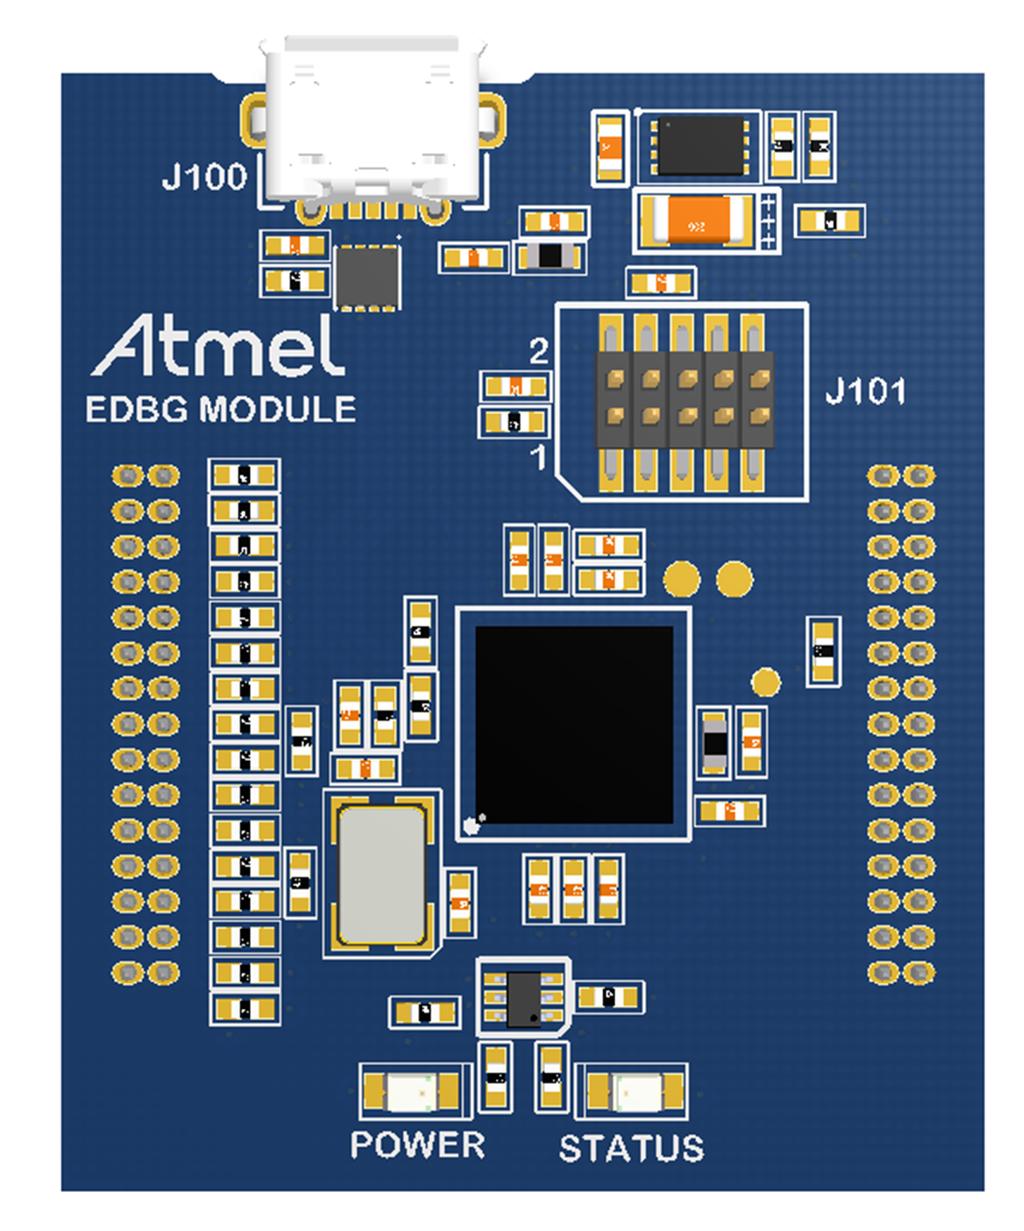 5. Embedded Debugger (EDBG) The demo kit features an on-board Embedded Debugger (EDBG) module. This can be used for programming and debugging the firmware using Atmel Studio. Figure 5-1.